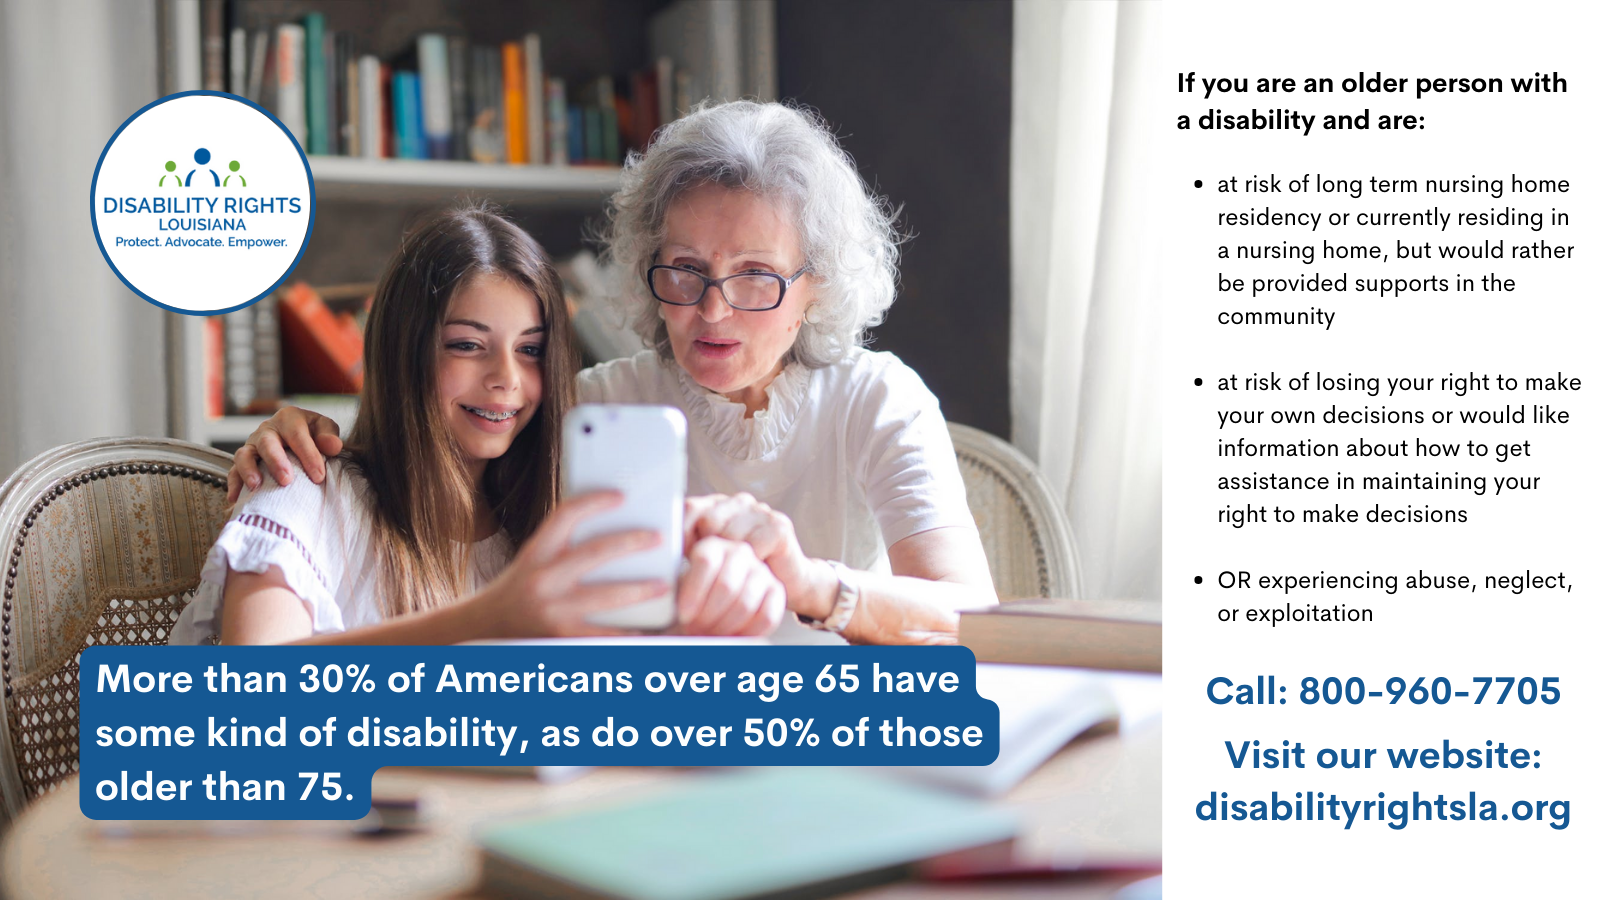 Over a photo of a young girl showing an older woman something on her phone, as they are seated in front of a bookcase. The text reads:May is Older Americans Month. Did you know that more than 30% of Americans over age 65 have some kind of disability, as do over 50% of those older than 75. DRLA works to advance independence, promote home and community based supports and services and combat abuse, neglect and exploitation of older Americans with disabilities. If you are an older person with a disability and are at risk of long term nursing home residency or currently residing in a nursing home, but would rather be provided supports in the community, we may be able to help. If you are an older person with a disability that is at risk of losing your right to make your own decisions or would like information about how to get assistance in maintaining your right to make decisions, we may be able to help. If you are an older person with a disability who is experiencing abuse, neglect, or exploitation, we may be able to help. Call 1-800-960-7705 or visit our website: www.disabilityrightsla.org